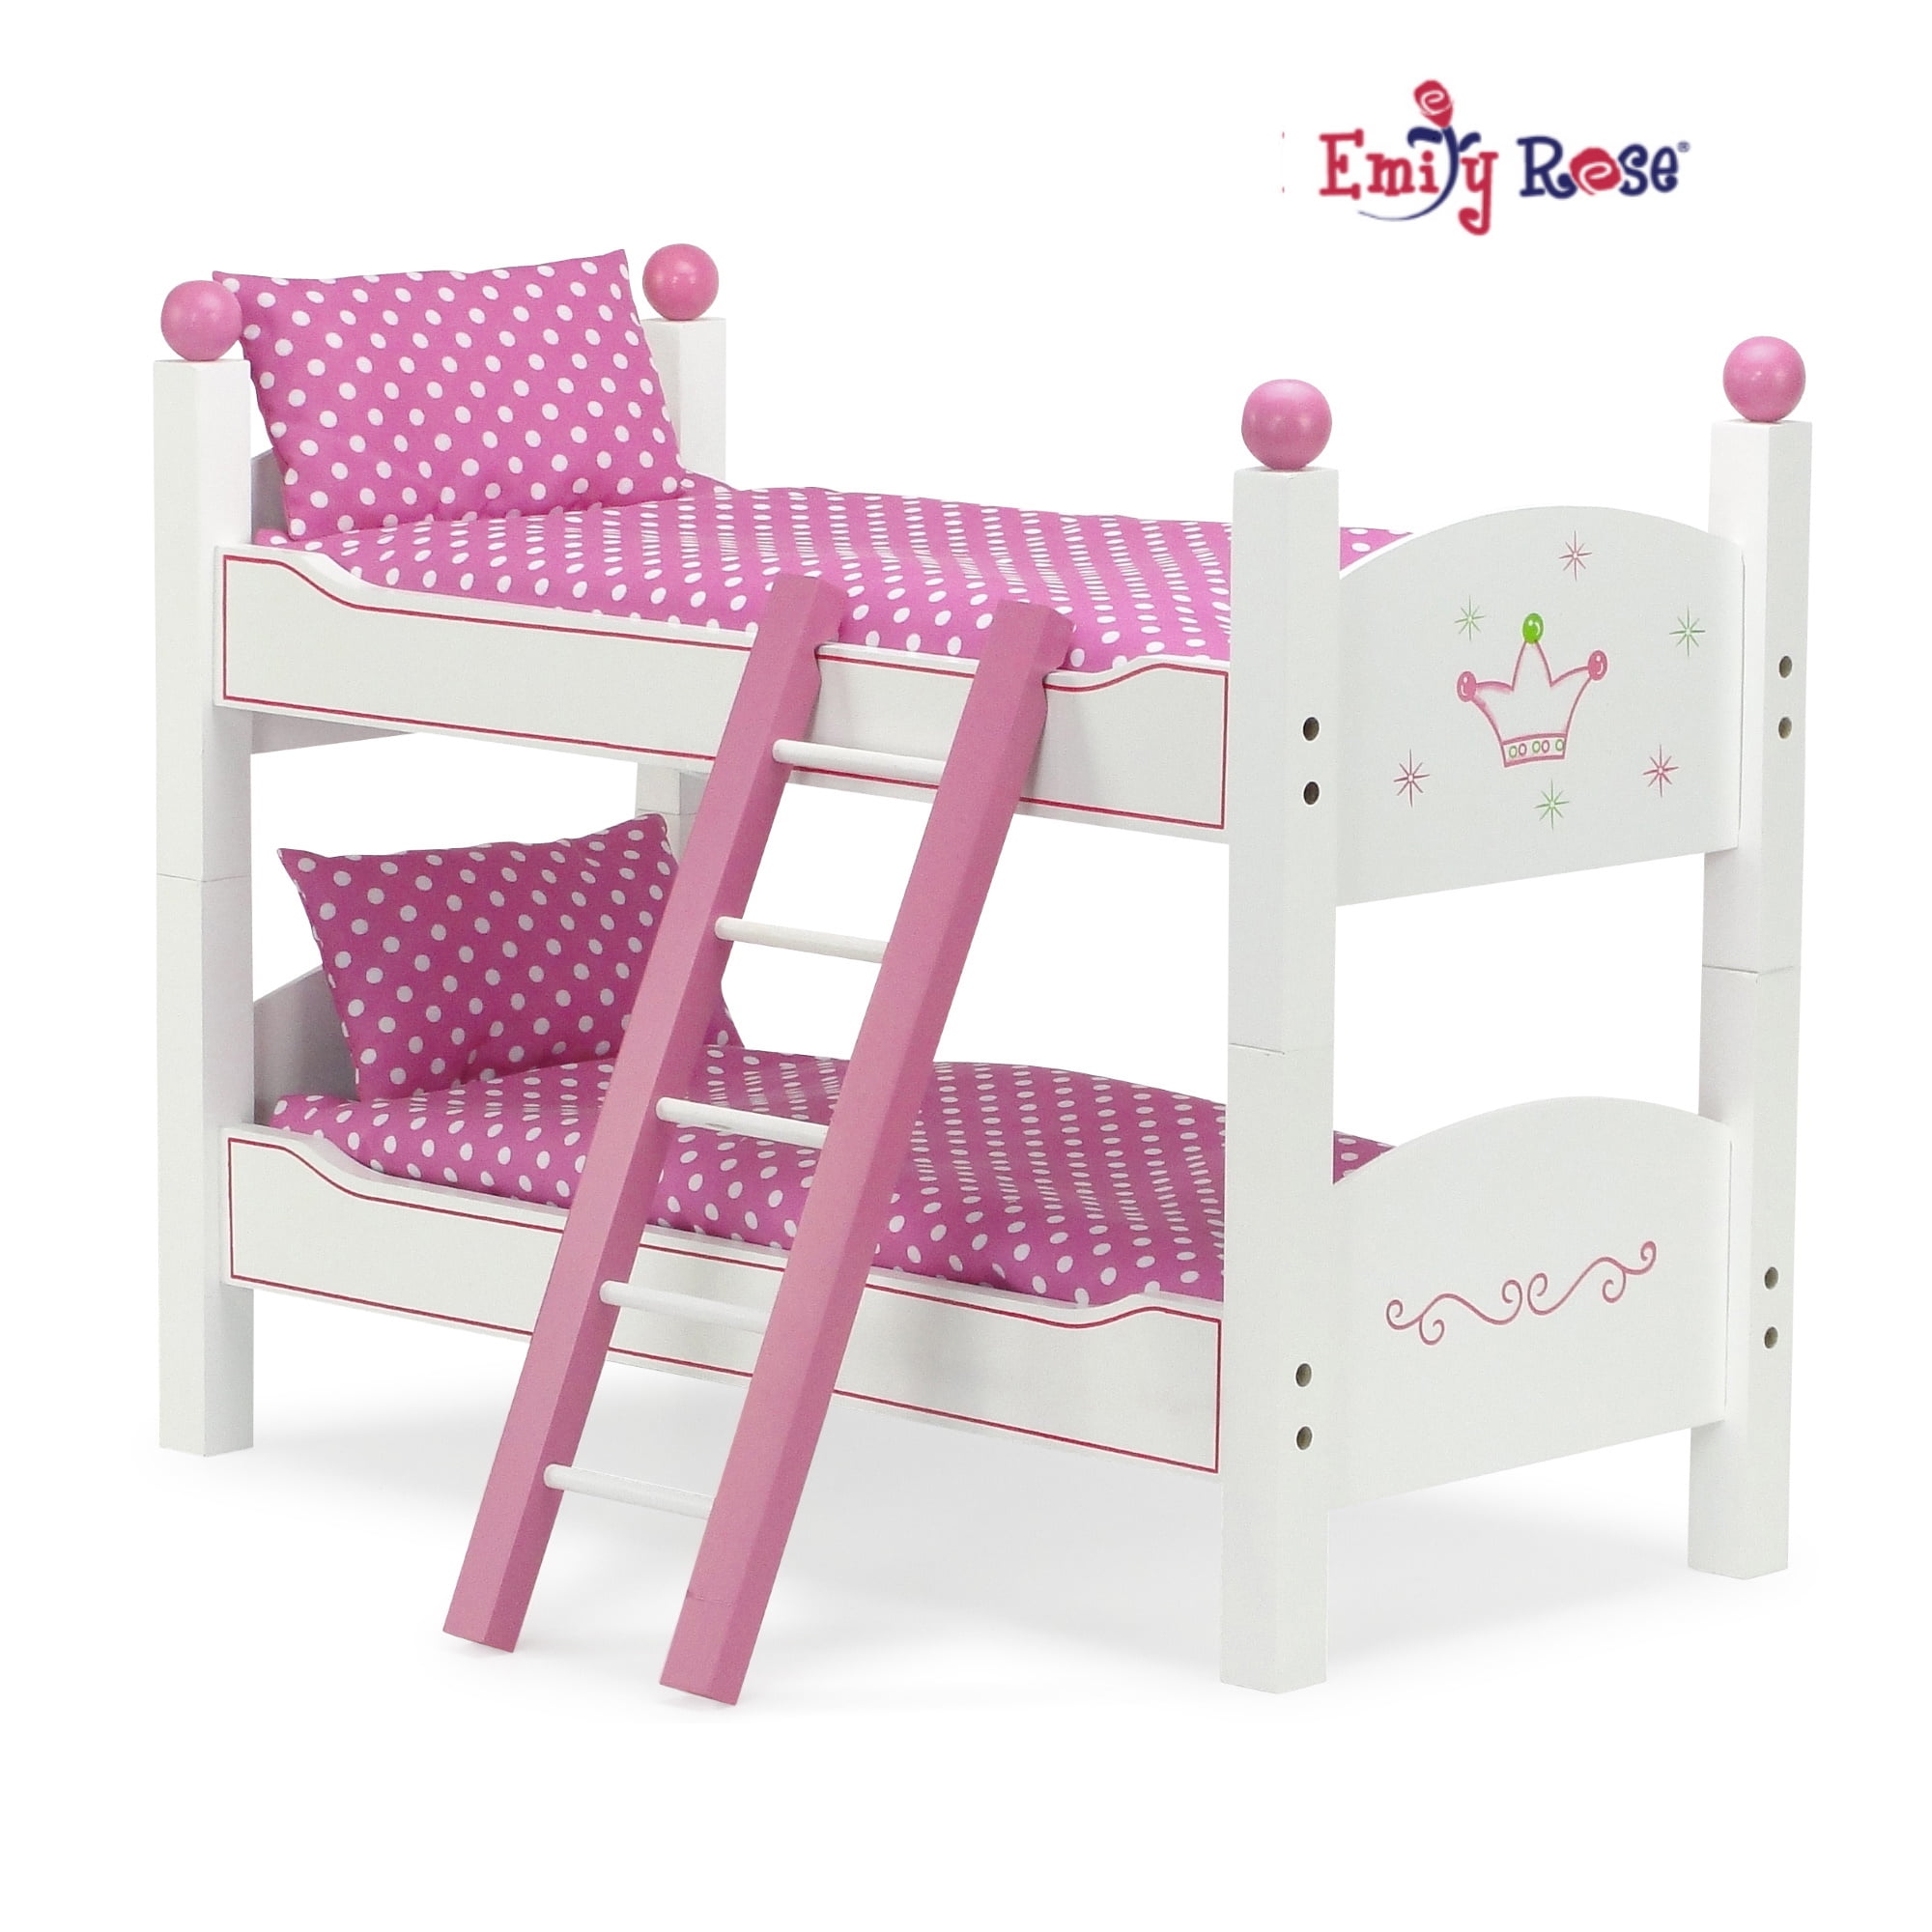 Emily Rose 18 inch Doll Bed | 18-inch Doll Bunk Bed Furniture with 